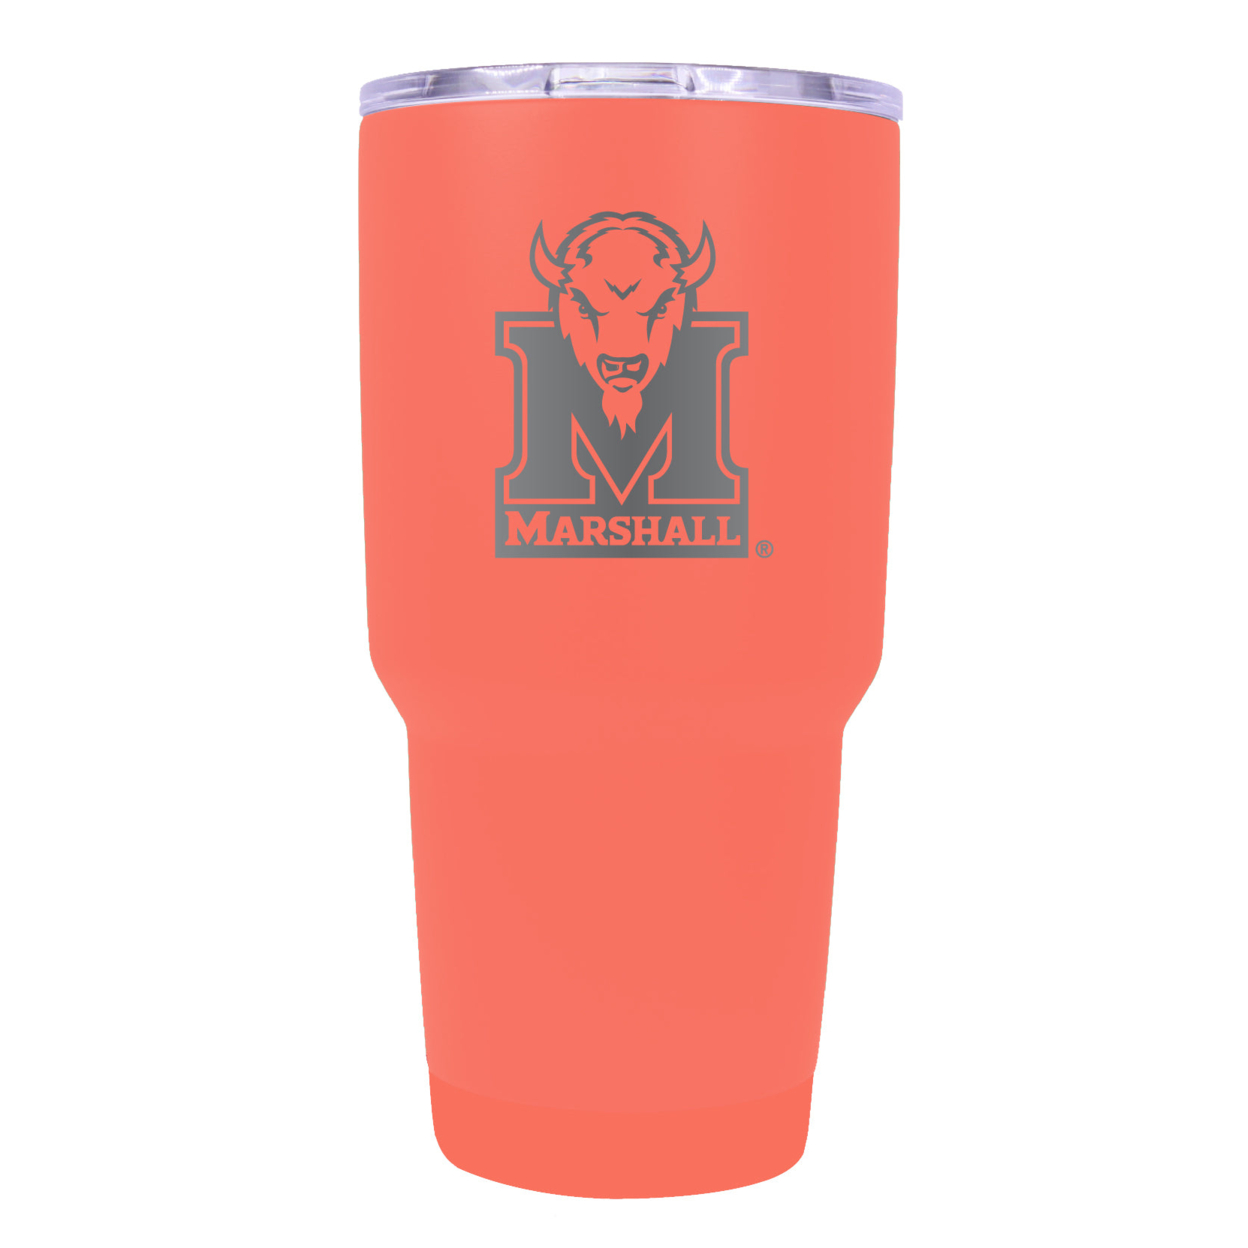 Marshall Thundering Herd 24 Oz Insulated Tumbler Etched - Choose Your Color - Coral